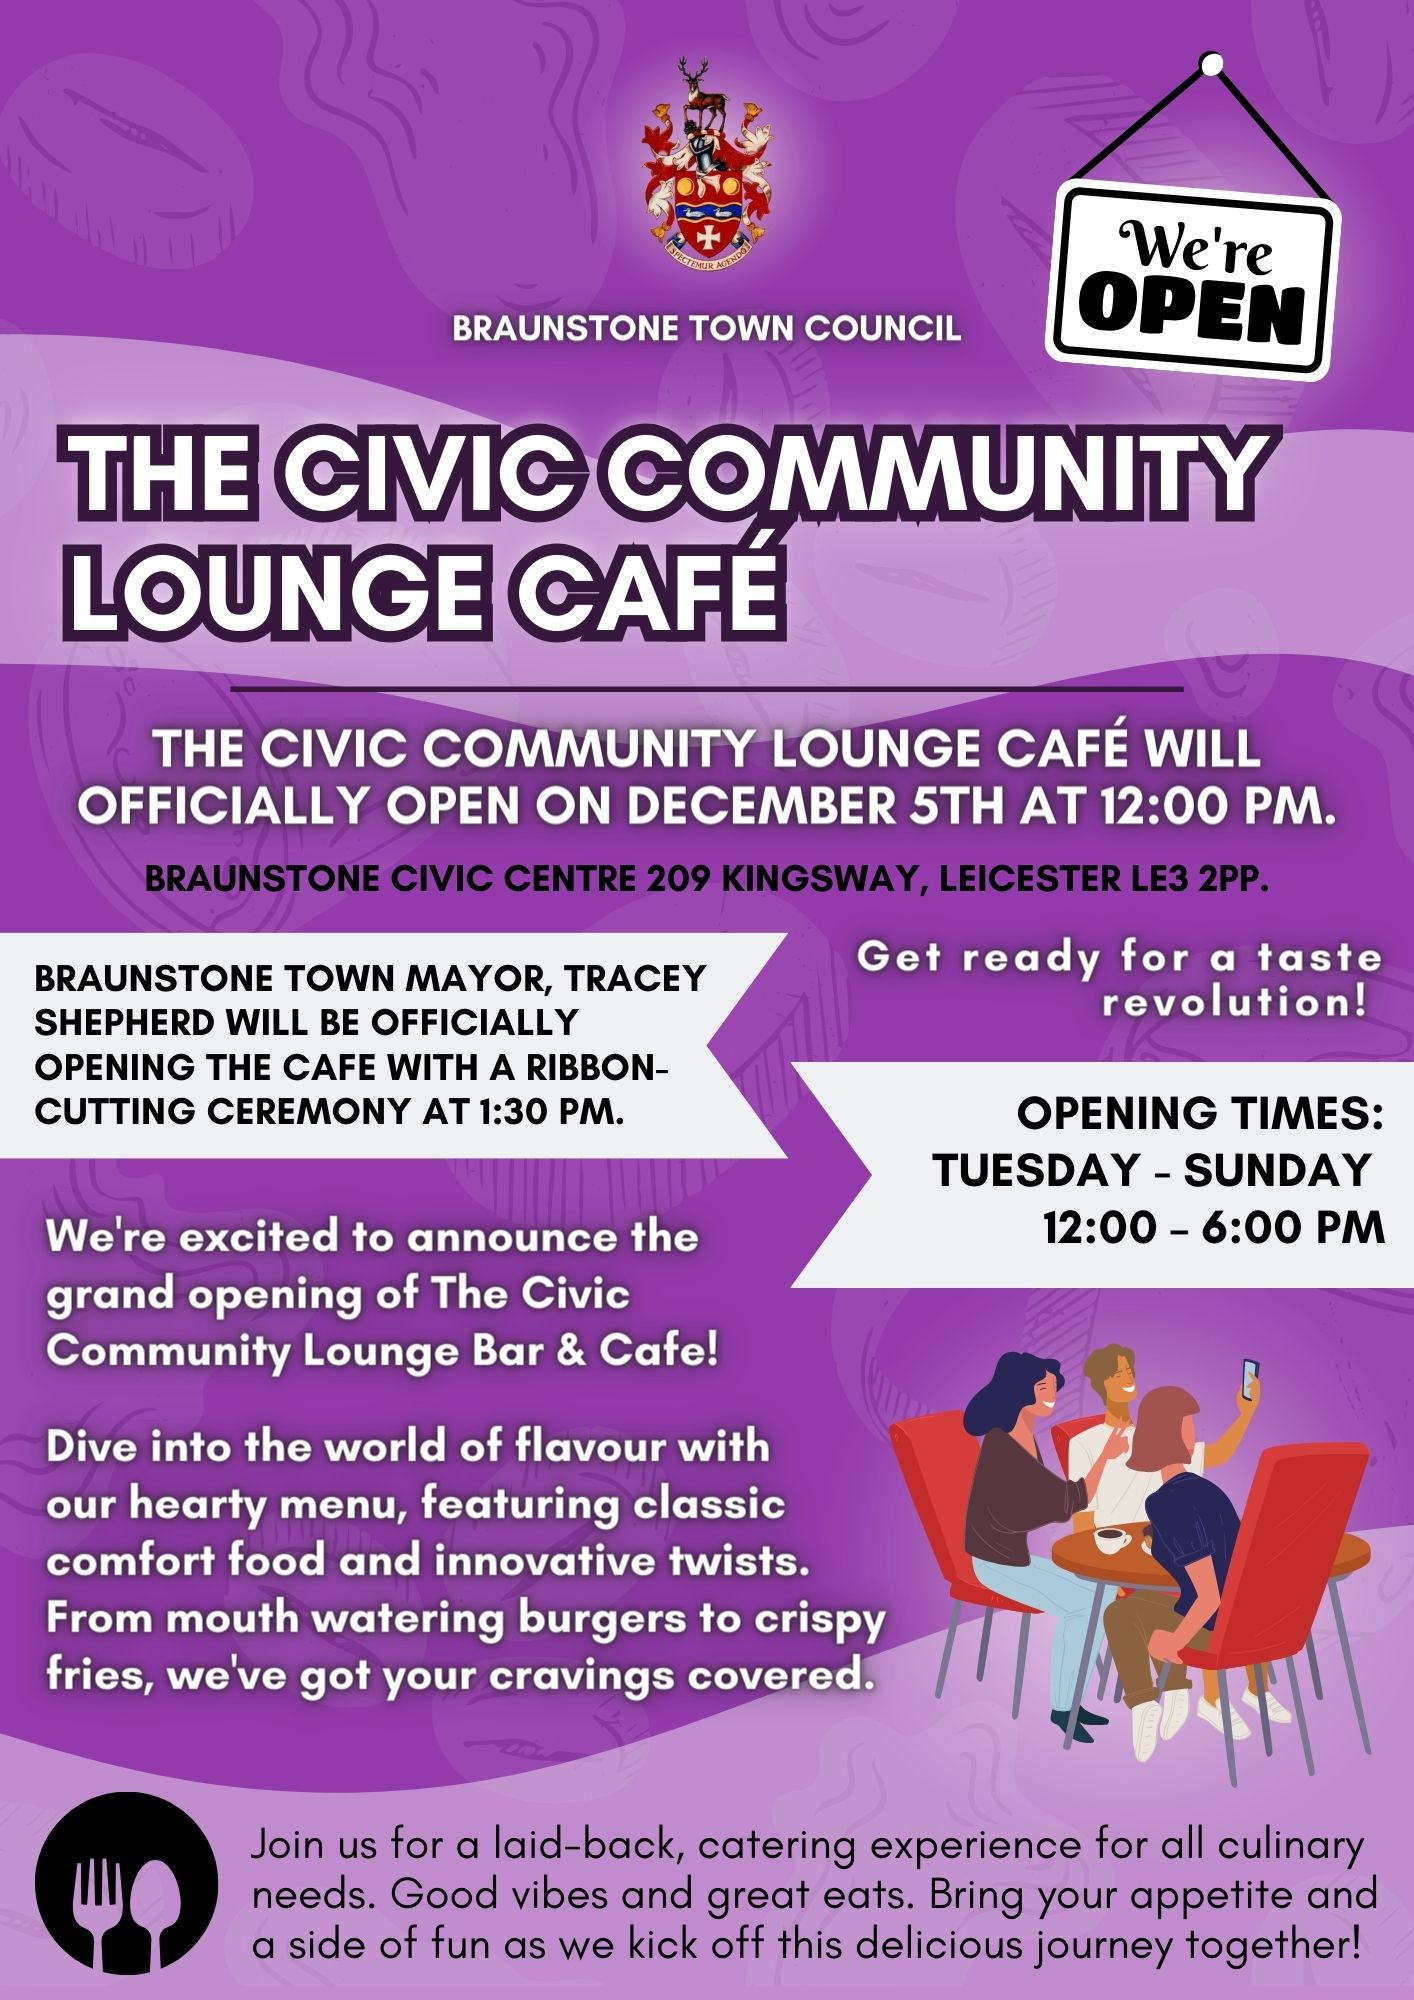 The Civic Community Lounge café will officially open on December 5th at 1200 pm. The Braunstone Town Mayor Tracey Shepherd will be present for the ribbon cutting ceremony at 130 pm. Please Come a